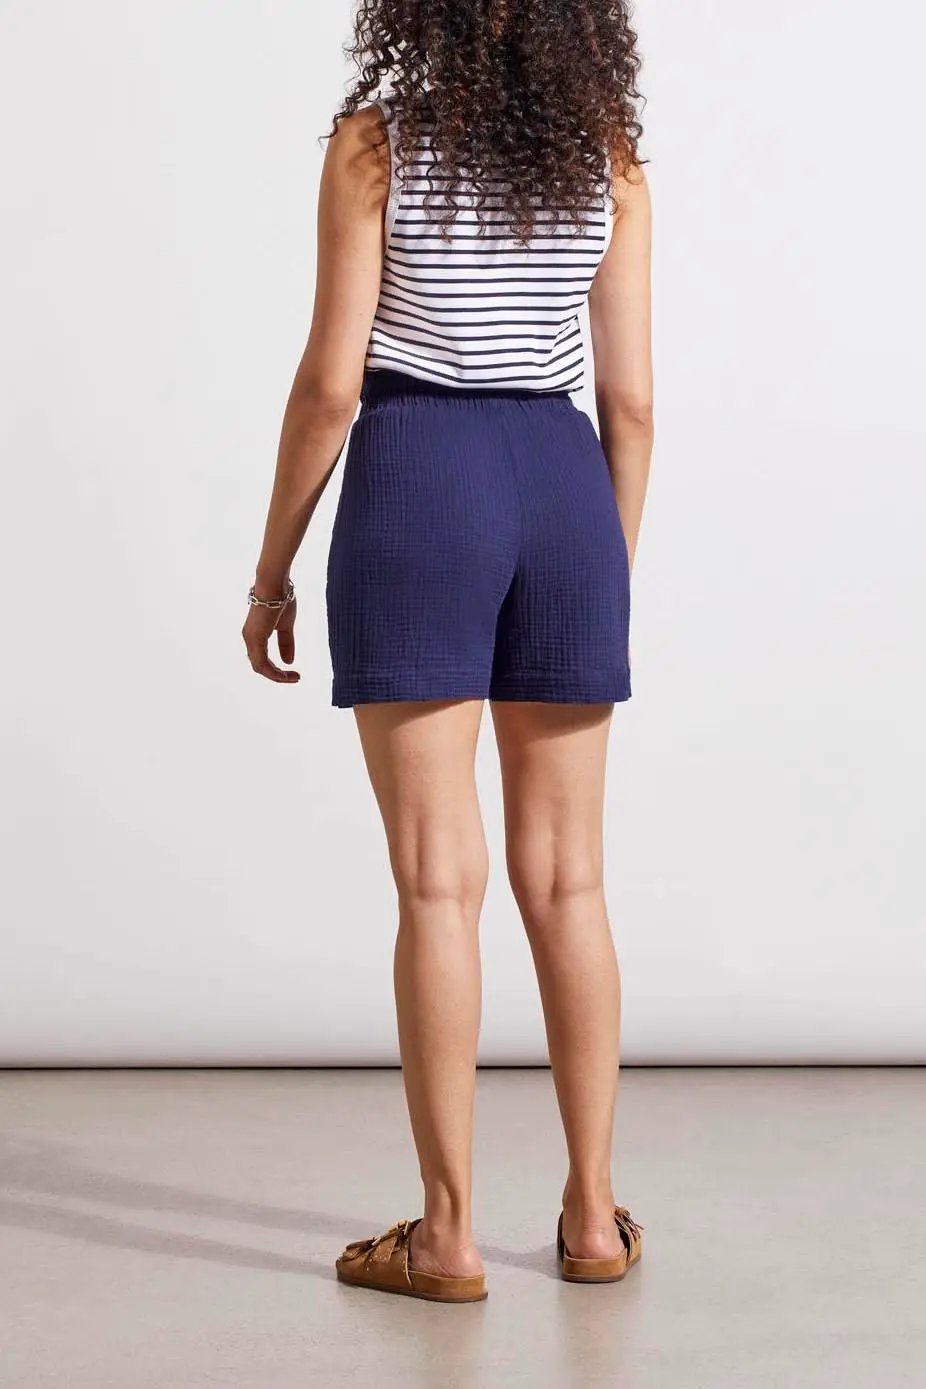 Woman in a casual blue romper with Tribal elastic waistband shorts, wearing a striped undershirt and brown sandals, poses for a fashion display.